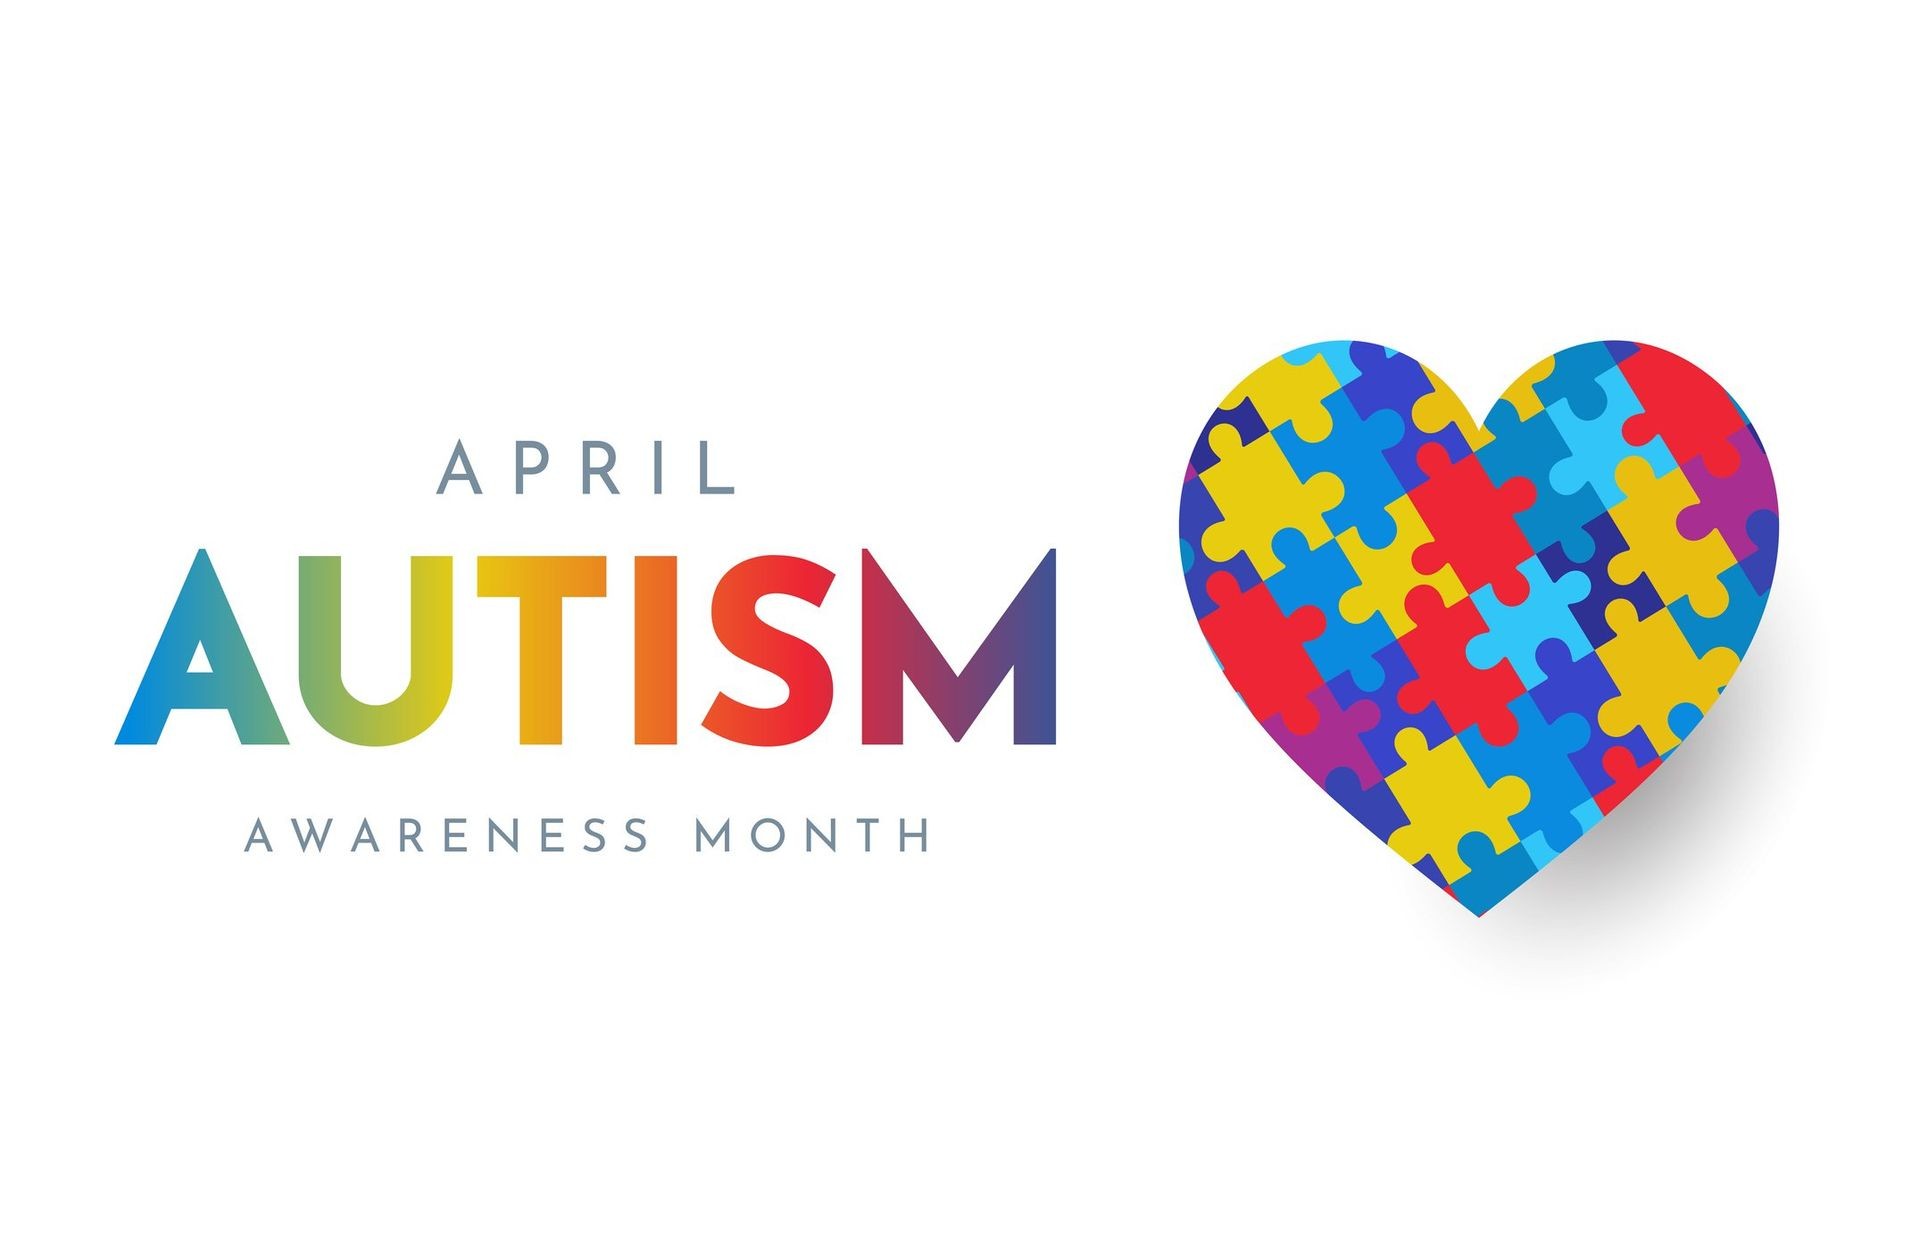 April is Autism Acceptance Month. Throughout the month, we will be celebrating our community as we foster acceptance and ignite change.  Autism is the fastest-growing developmental disability in the United States, with one in 36 children receiving a diagnosis, according to a newly-released report from the Centers for Disease Control (CDC). In addition to 5.8 million Autistic adults, this prevalence means that Autism likely touches a vast majority of Americans either through relationships or direct experience, and the support needs across the Autism spectrum are vastly different. During Autism Acceptance Month, the ASCV is highlighting the diversity of experiences and needs with a reminder that acceptance happens every day.